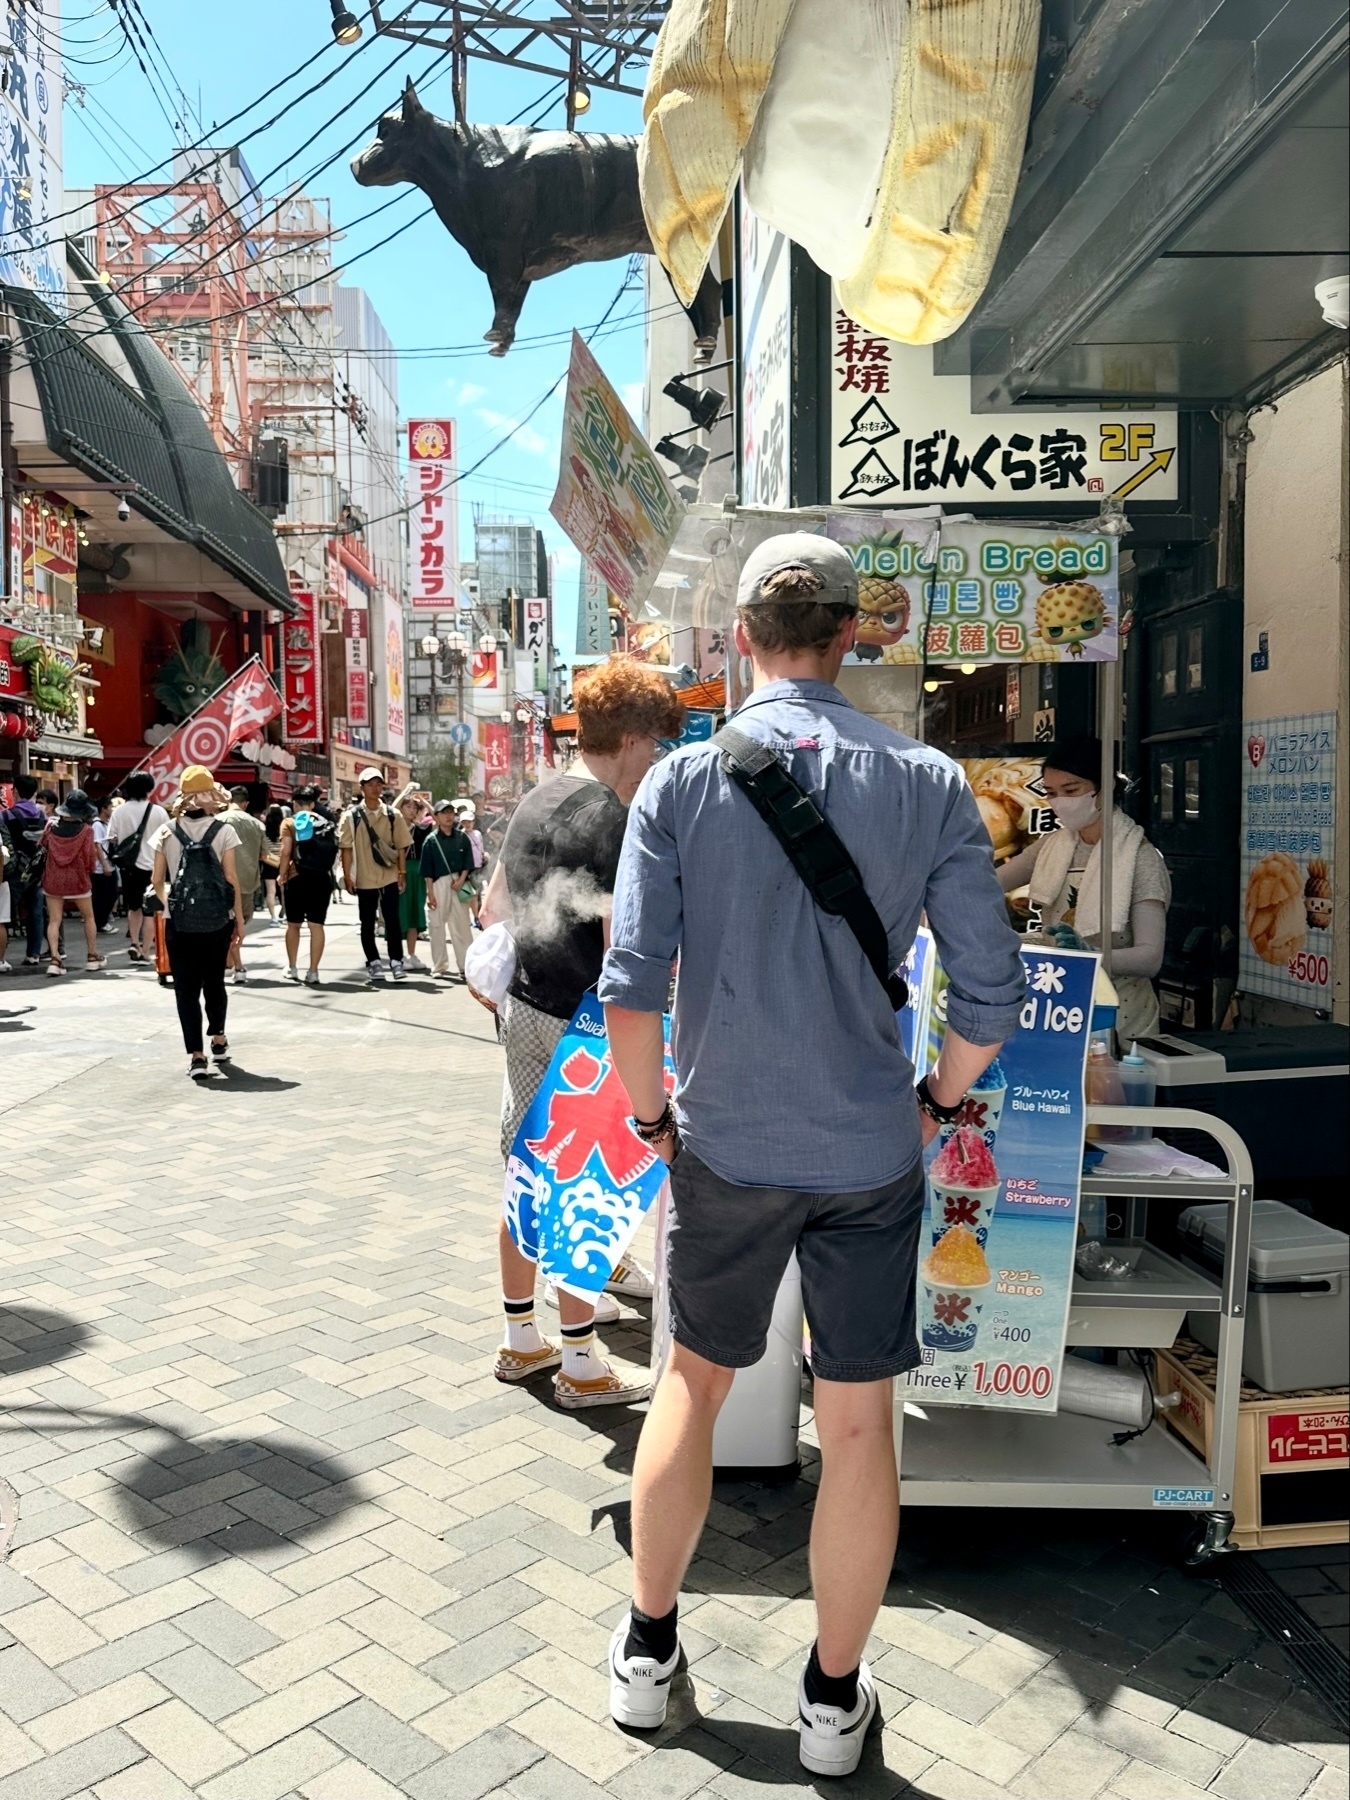 A busy street scene with pedestrians, a hanging sculpture of a cow, oversized model food items, and various signage in the shopping district of Osaka, Japan.